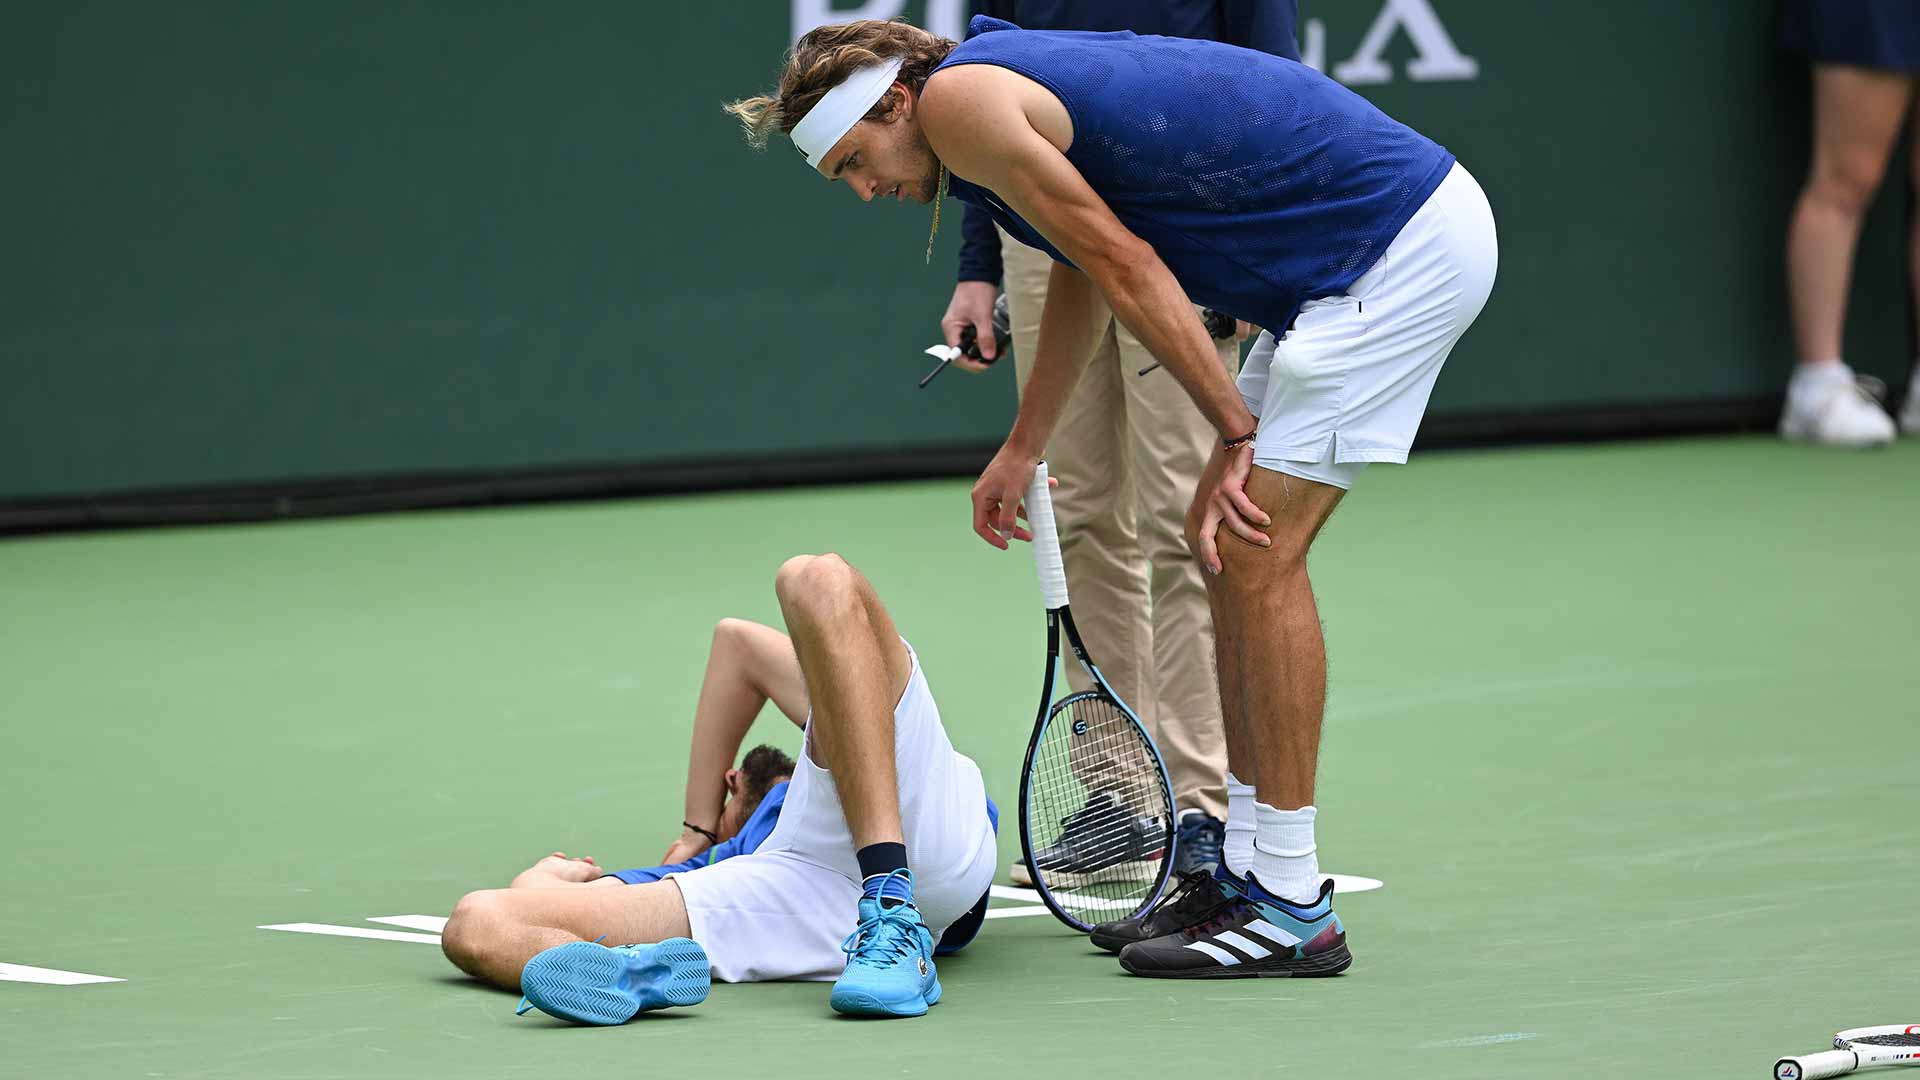 <a href='https://www.atptour.com/en/players/daniil-medvedev/mm58/overview'>Daniil Medvedev</a> takes time out after an ankle injury as <a href='https://www.atptour.com/en/players/alexander-zverev/z355/overview'>Alexander Zverev</a> looks on.